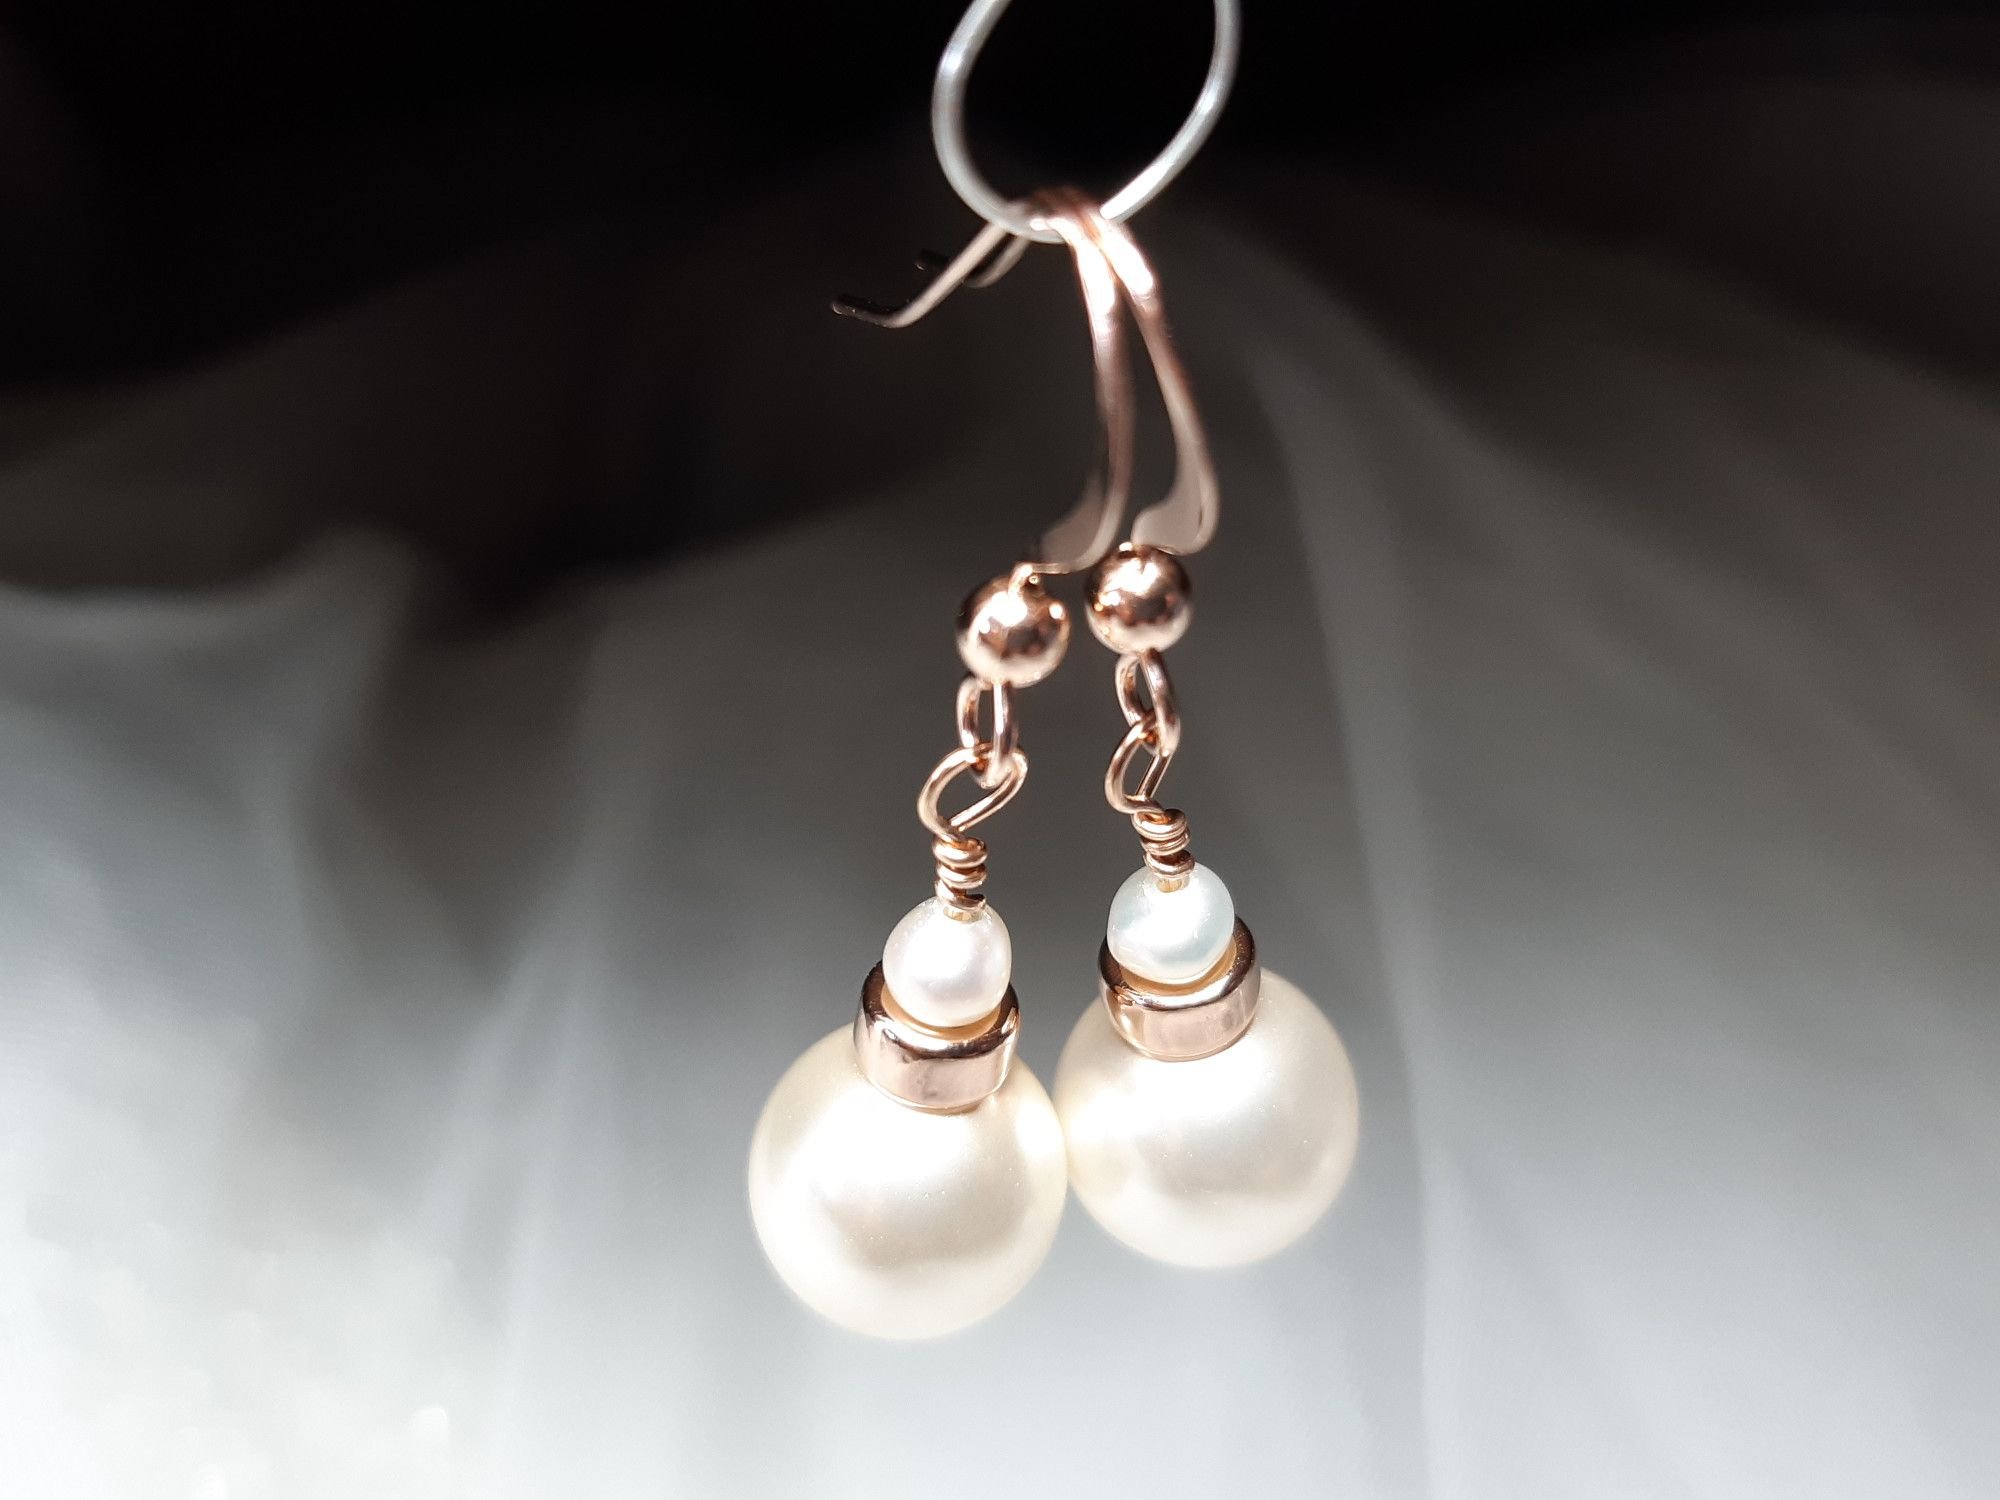 Occasion-bridal-wedding-pearl earrings with rose gold-4.jpg